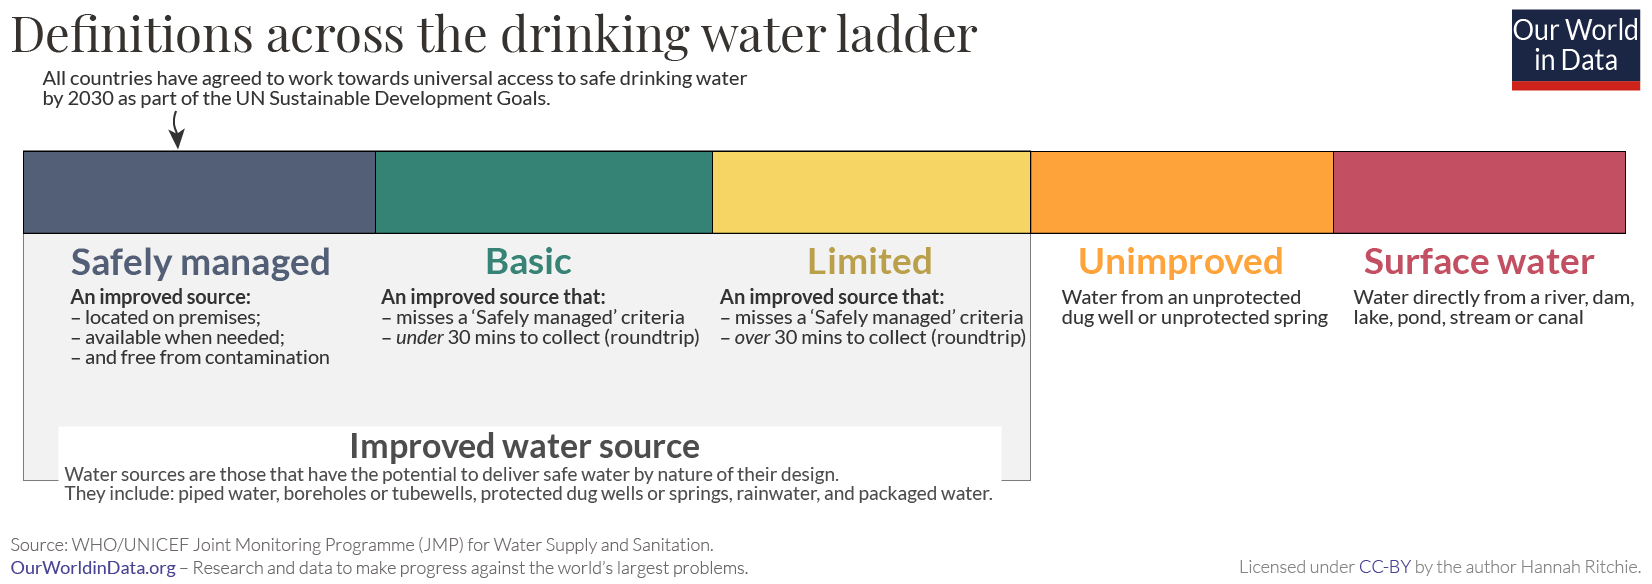 Clean water definitions